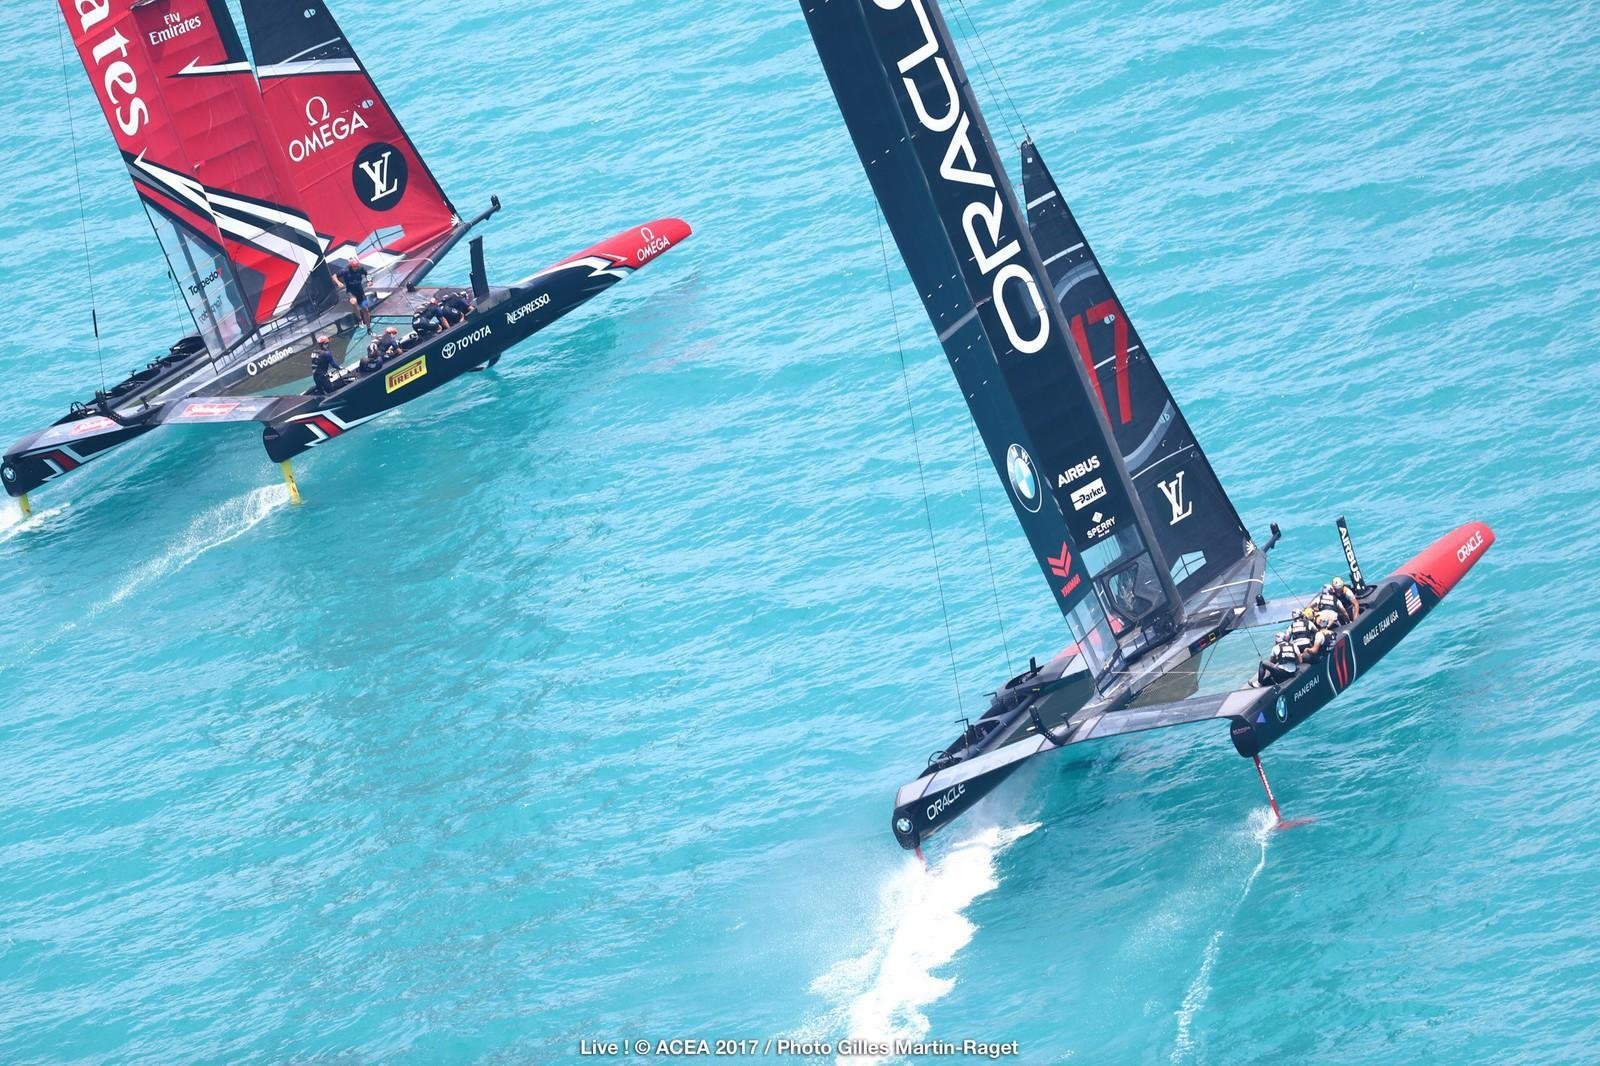 Team New Zealand stage remarkable comeback to open up America's Cup lead, America's Cup